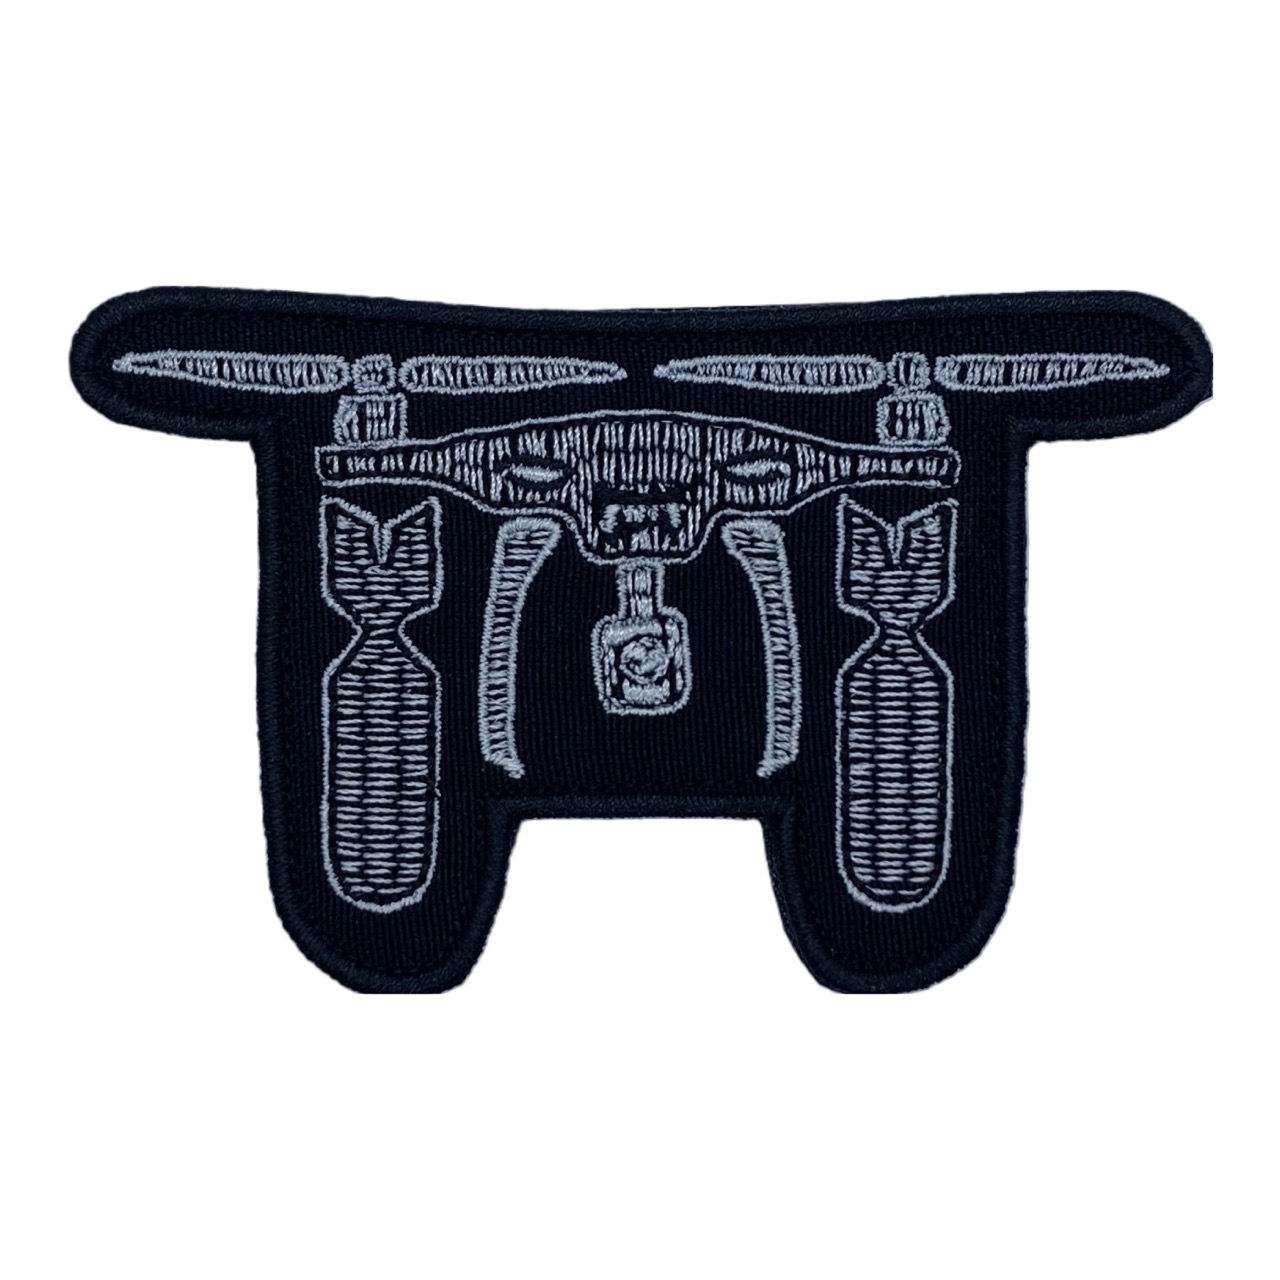 Drone - embroidered patch